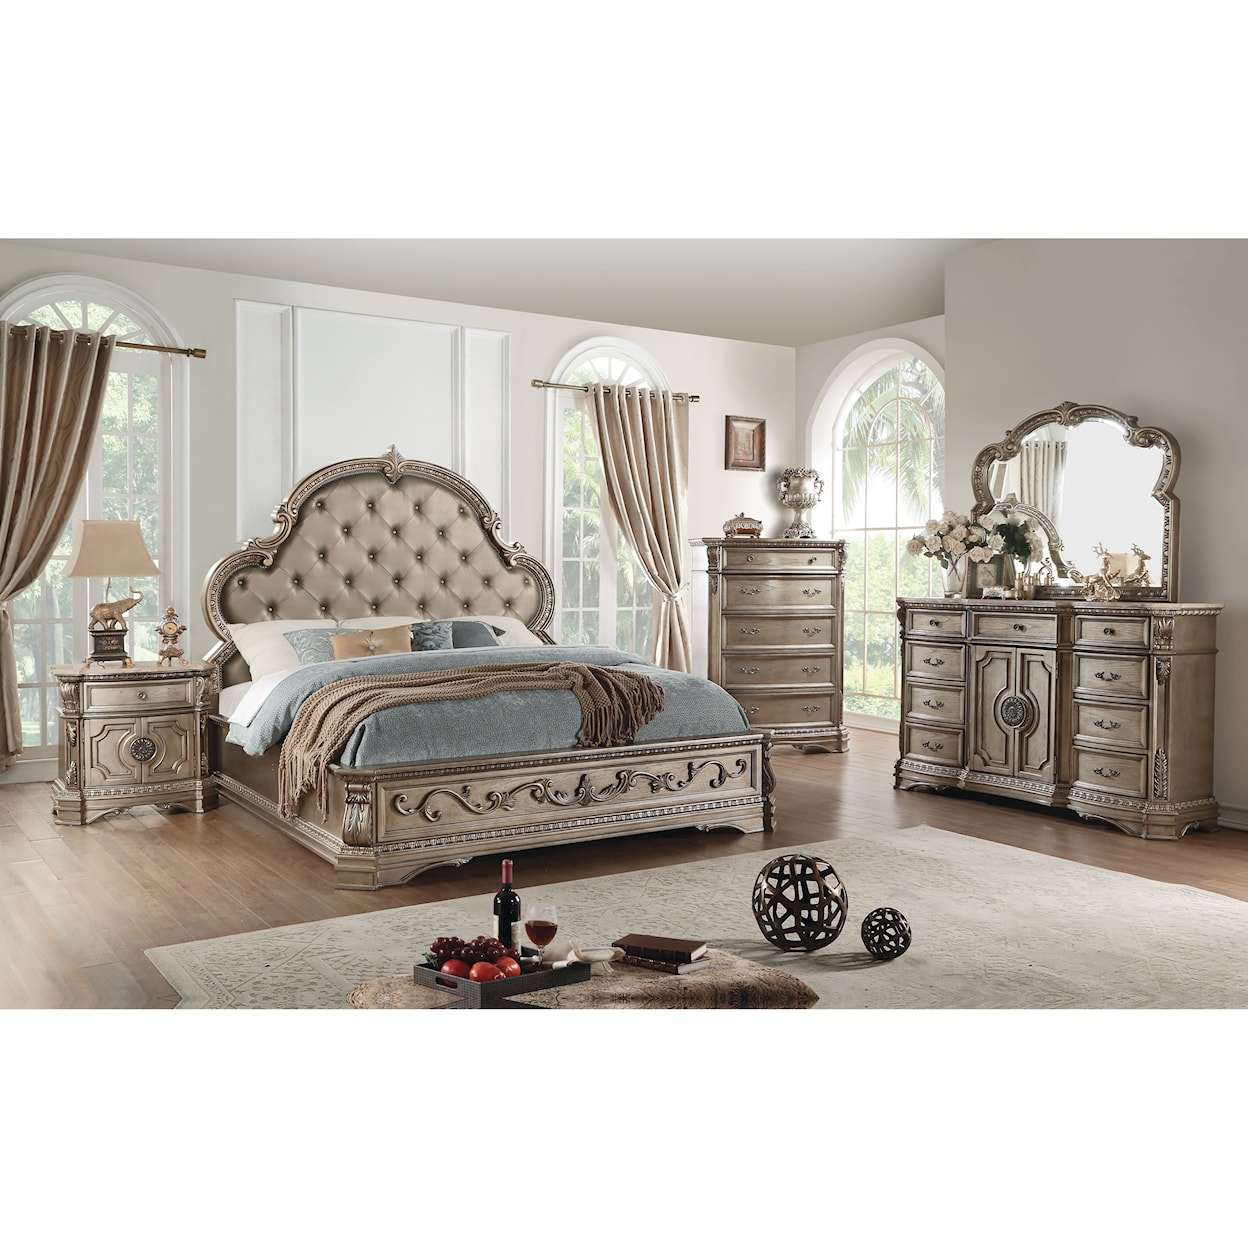 Acme Furniture Northville 7pc Queen Bedroom Group